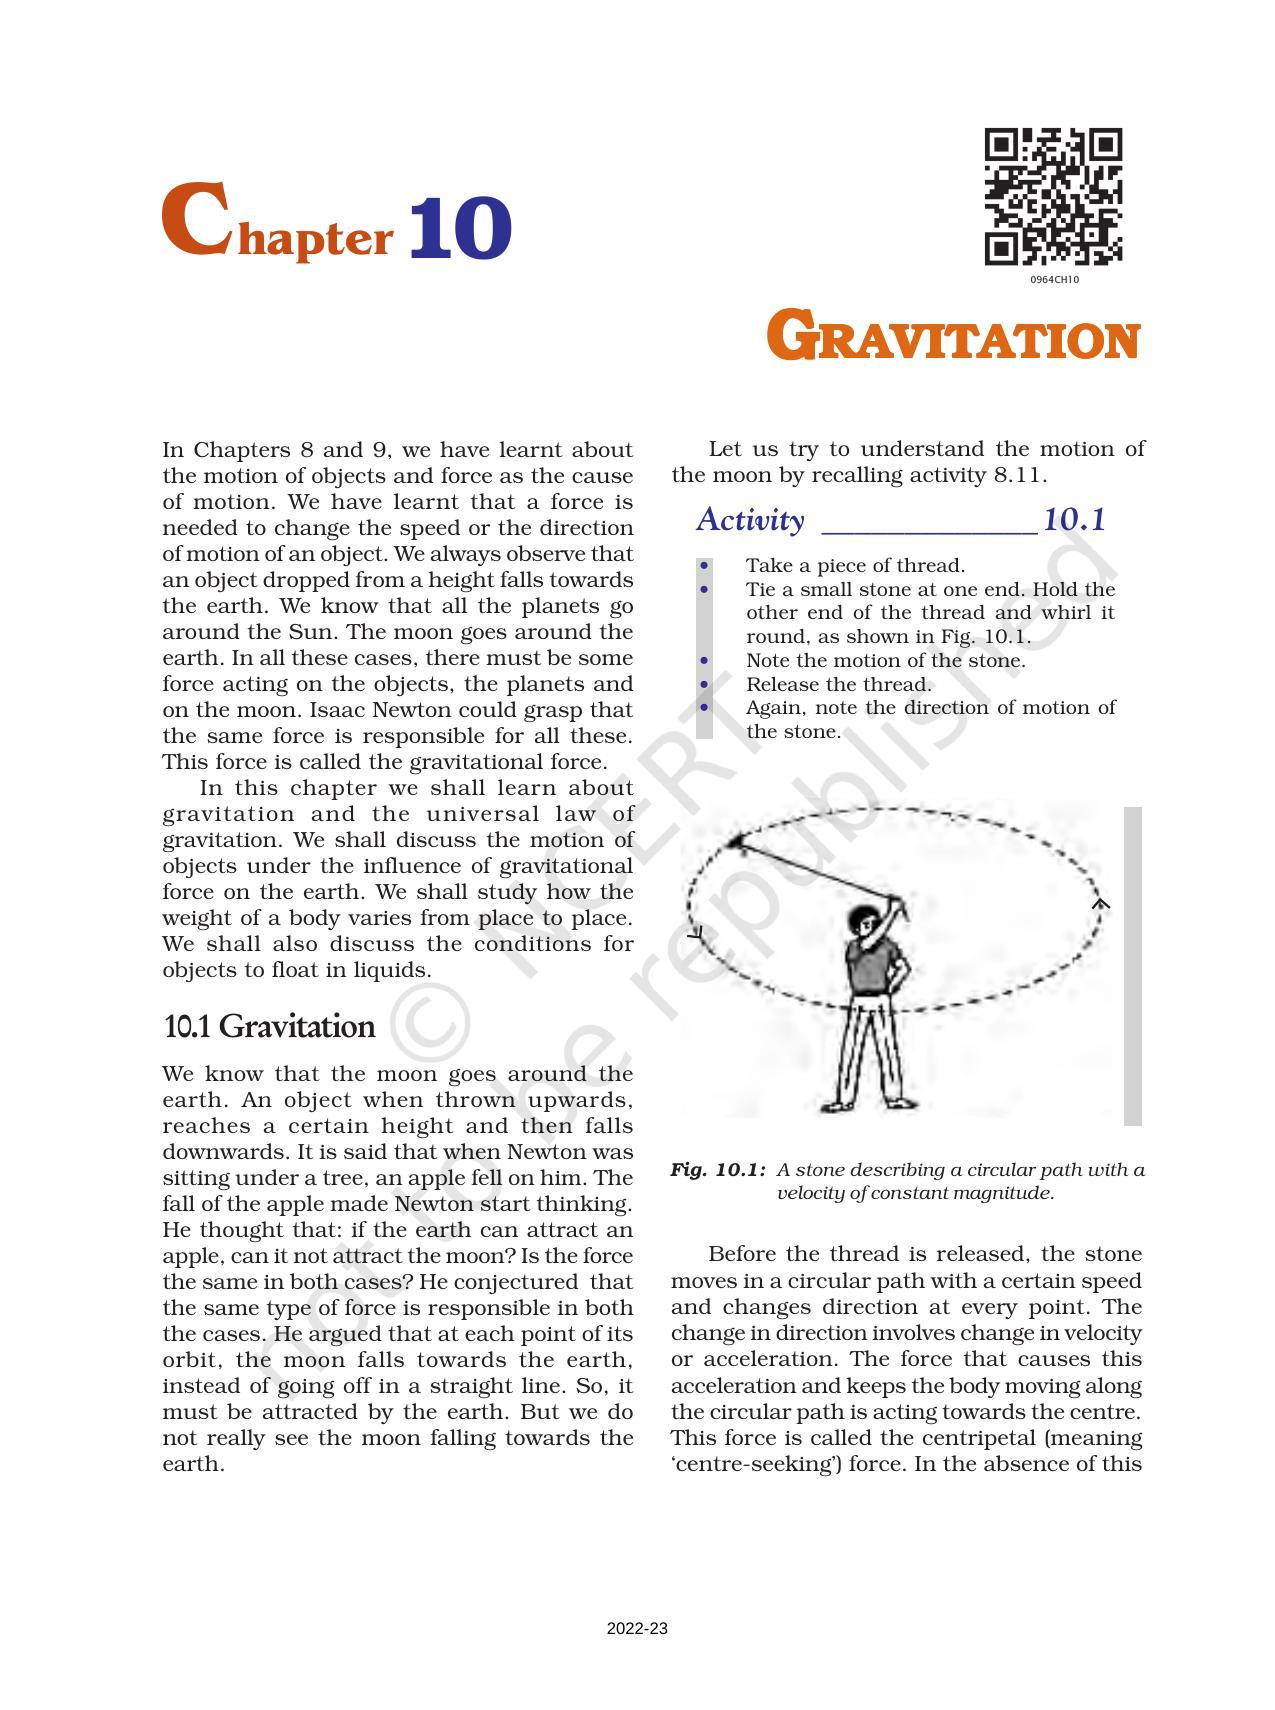 NCERT Book for Class 9 Science Chapter 10 Gravitation - Page 1